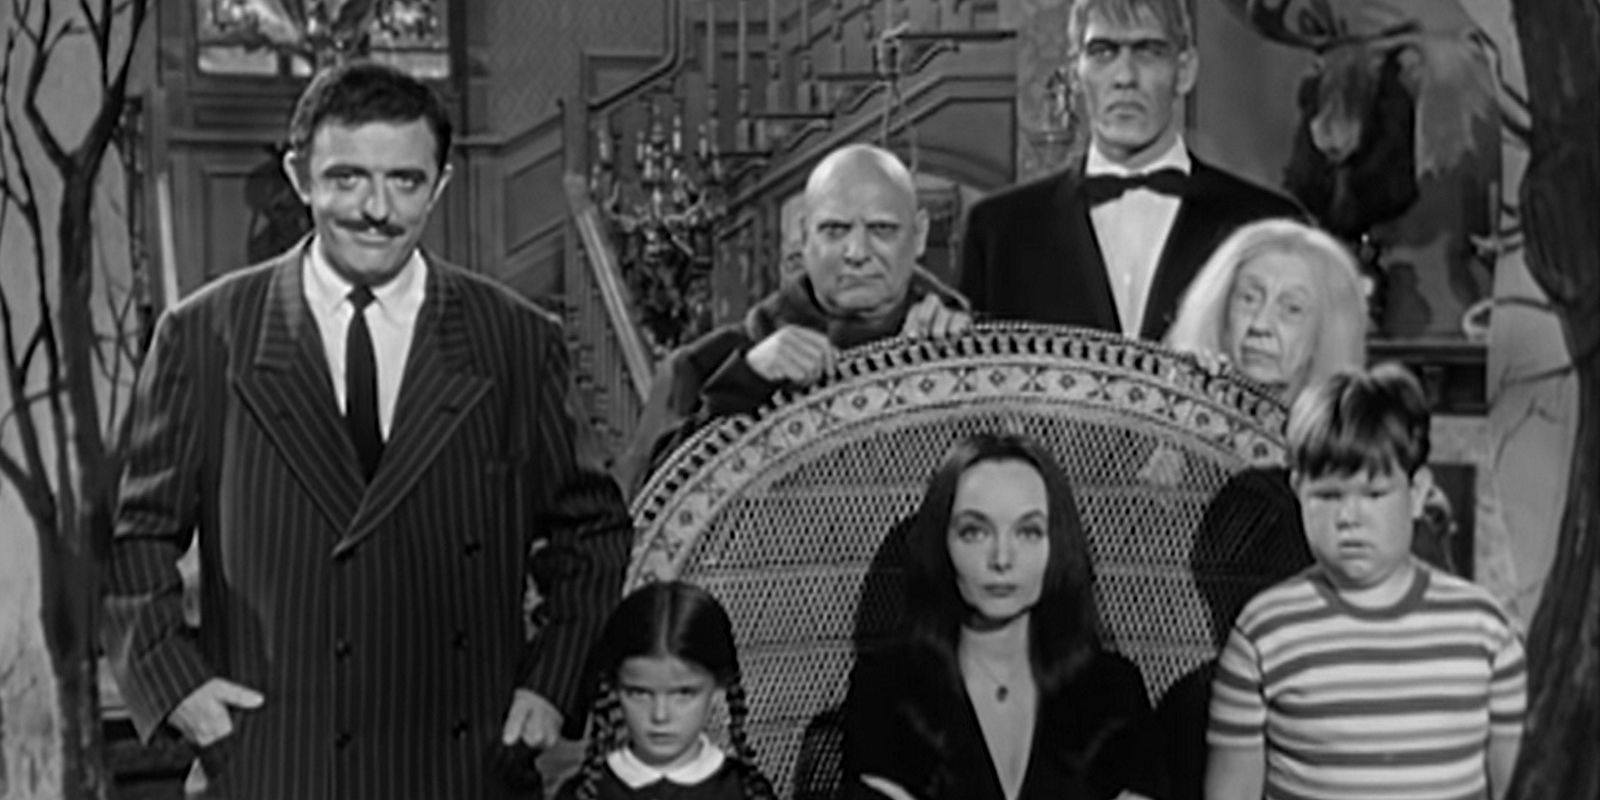 Wednesday': Addams Family themed show is great at horror comedy